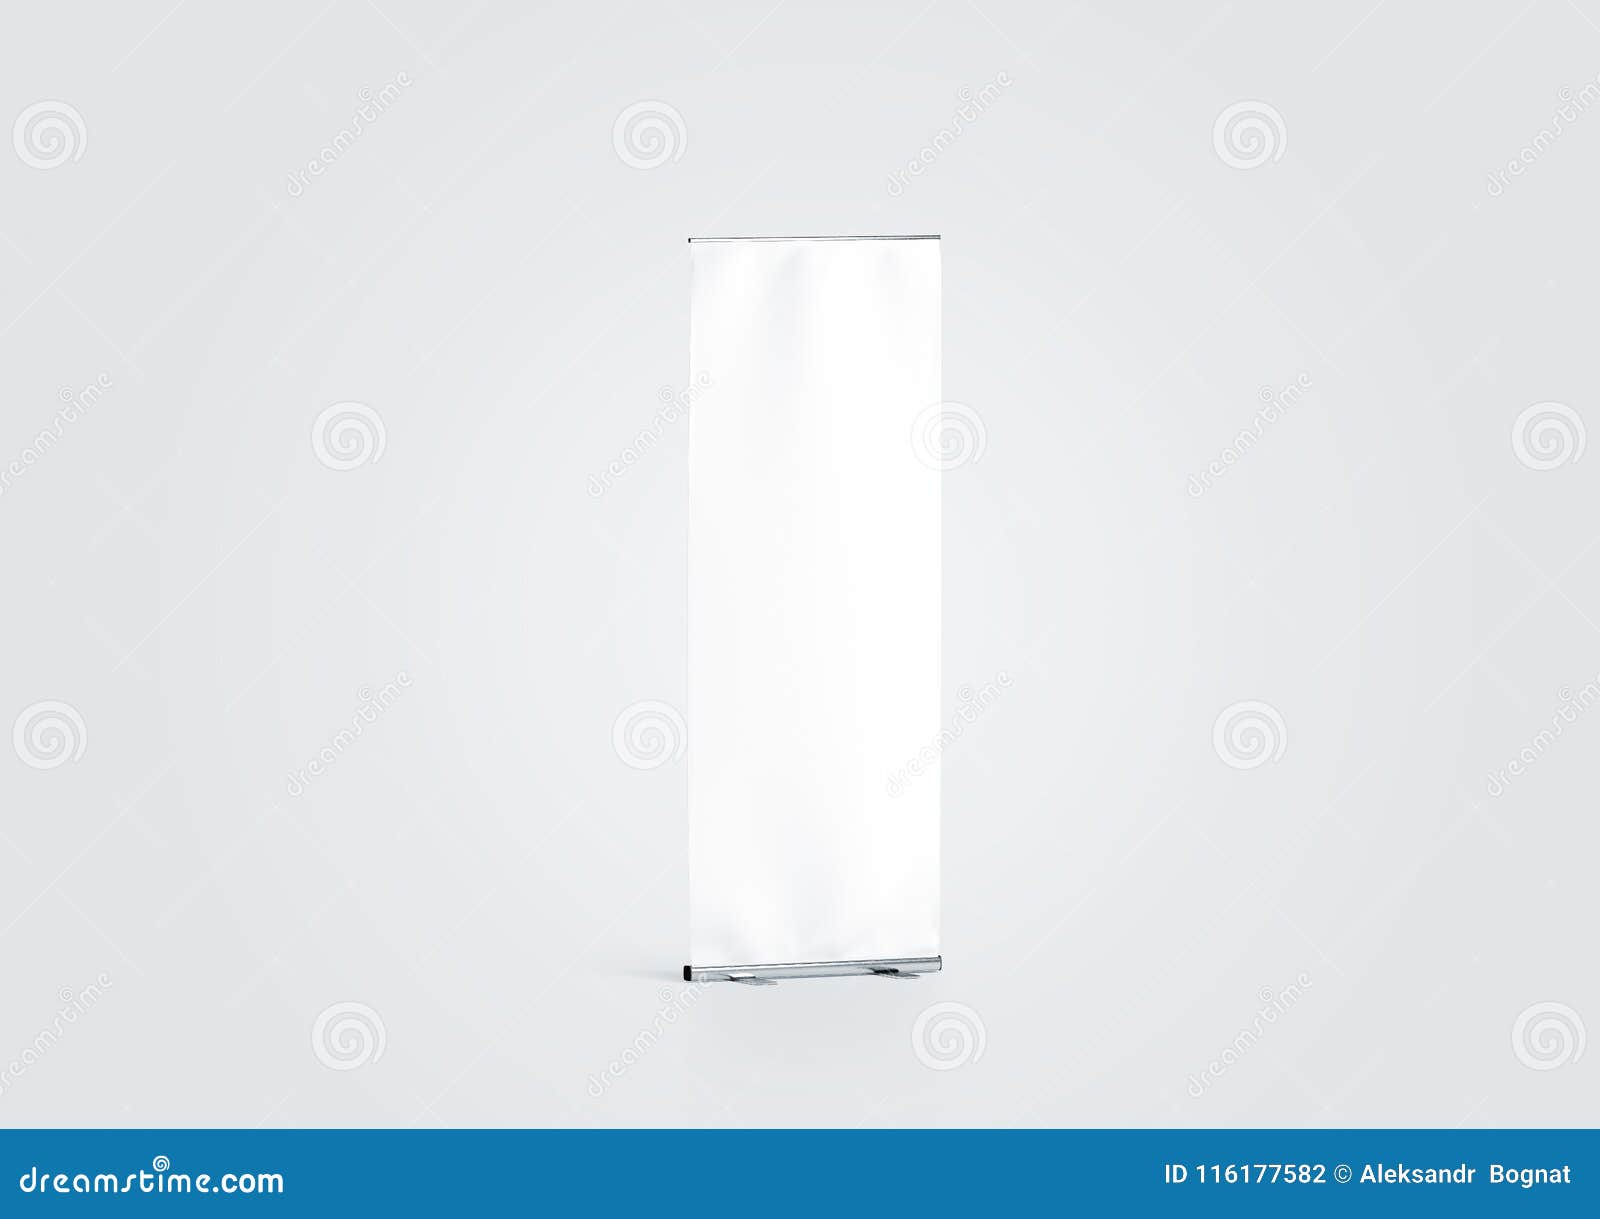 blank white roll-up banner display mockup, side view,